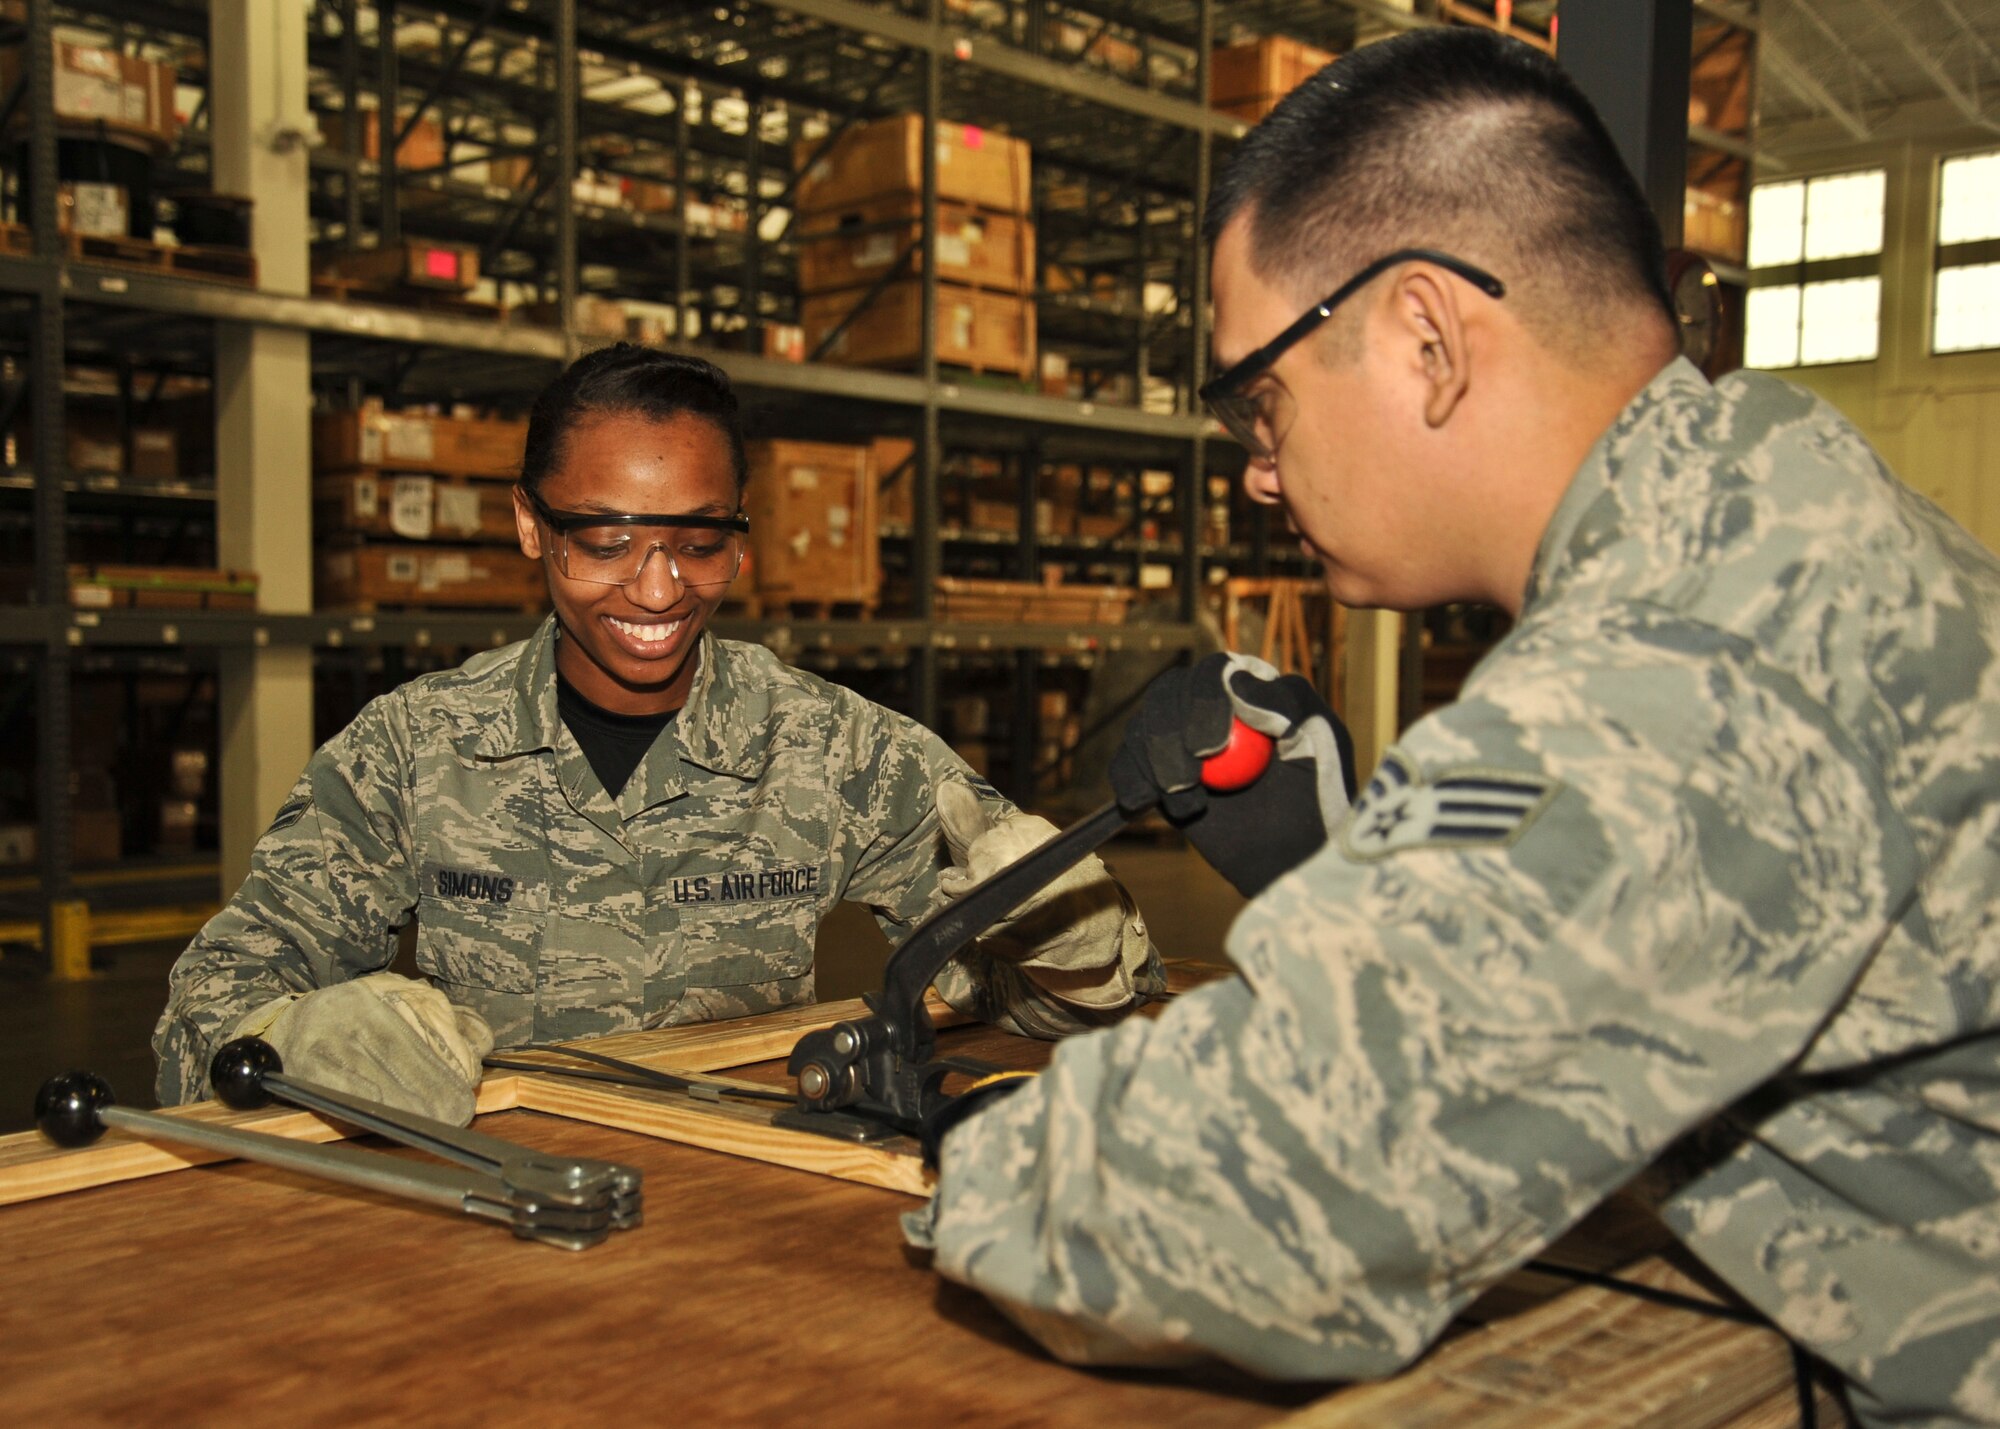 Airman 1st Class Patrice Simons, 92nd Logistics Readiness Squadron traffic management apprentice, assists Senior Airman Johnraphael Navarro, 92nd LRS traffic management journeyman, in closing up a crate March 18, 2016, at Fairchild Air Force Base, Wash. The packaging process includes making sure the item has the correct stock number and proper documentation. After that they will check to ensure the cushioning is adequate for protecting the item and tape up the box, or in some instances they will build a crate for shipping. (U.S Air Force photo/Airman 1st Class Taylor Bourgeous)